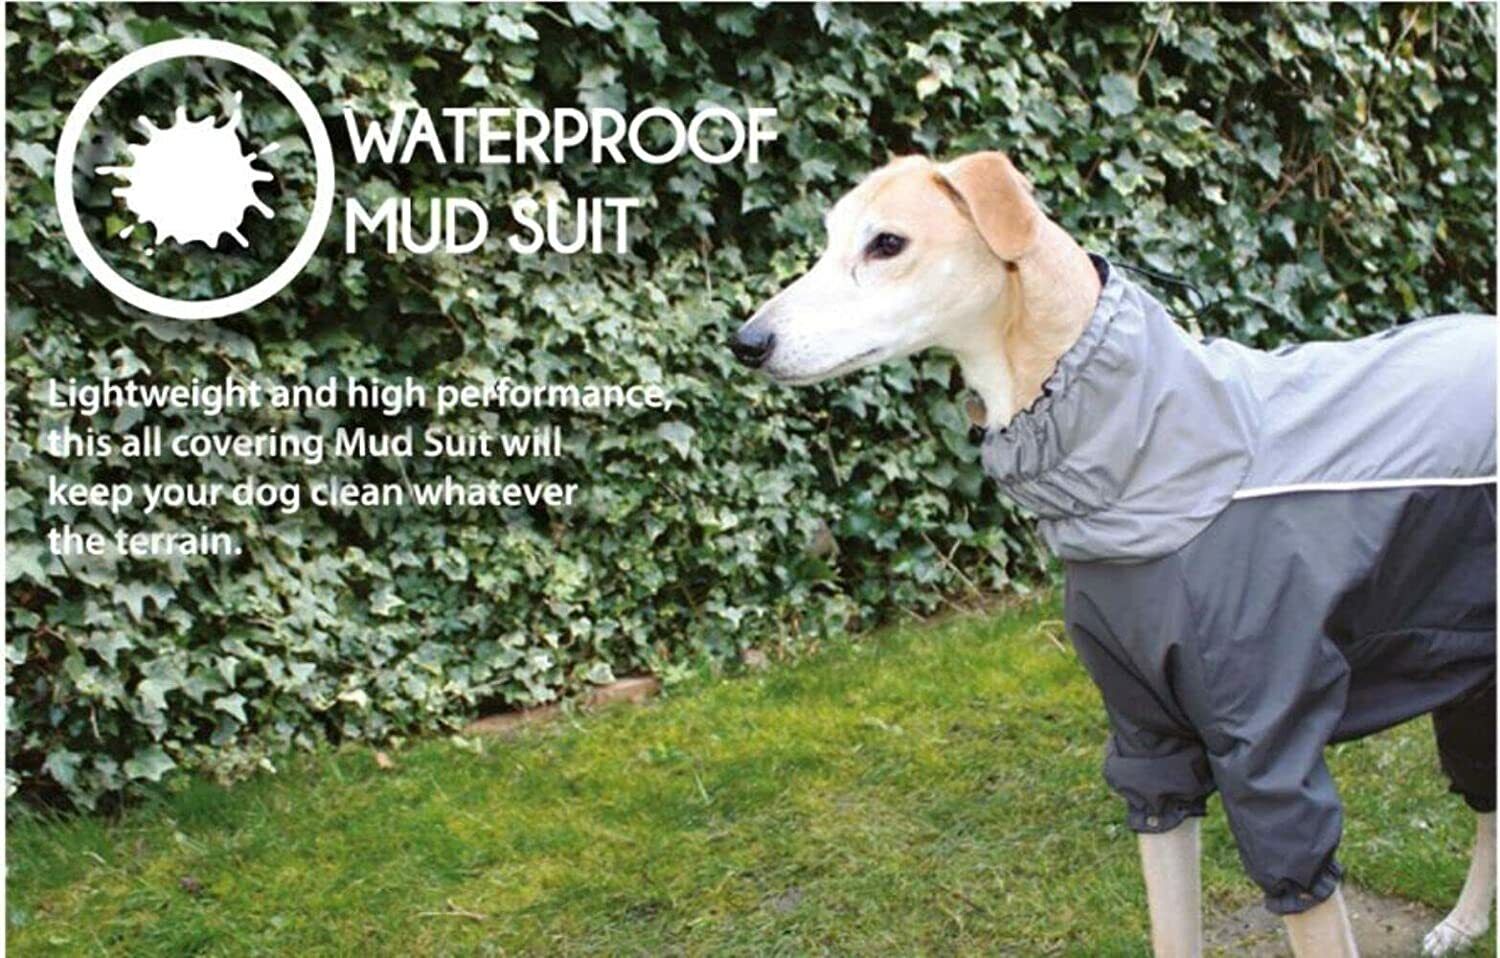 Waterproof Mud Suit Jacket 4 Legged Raincoat for Dogs - Mutts-Nutts